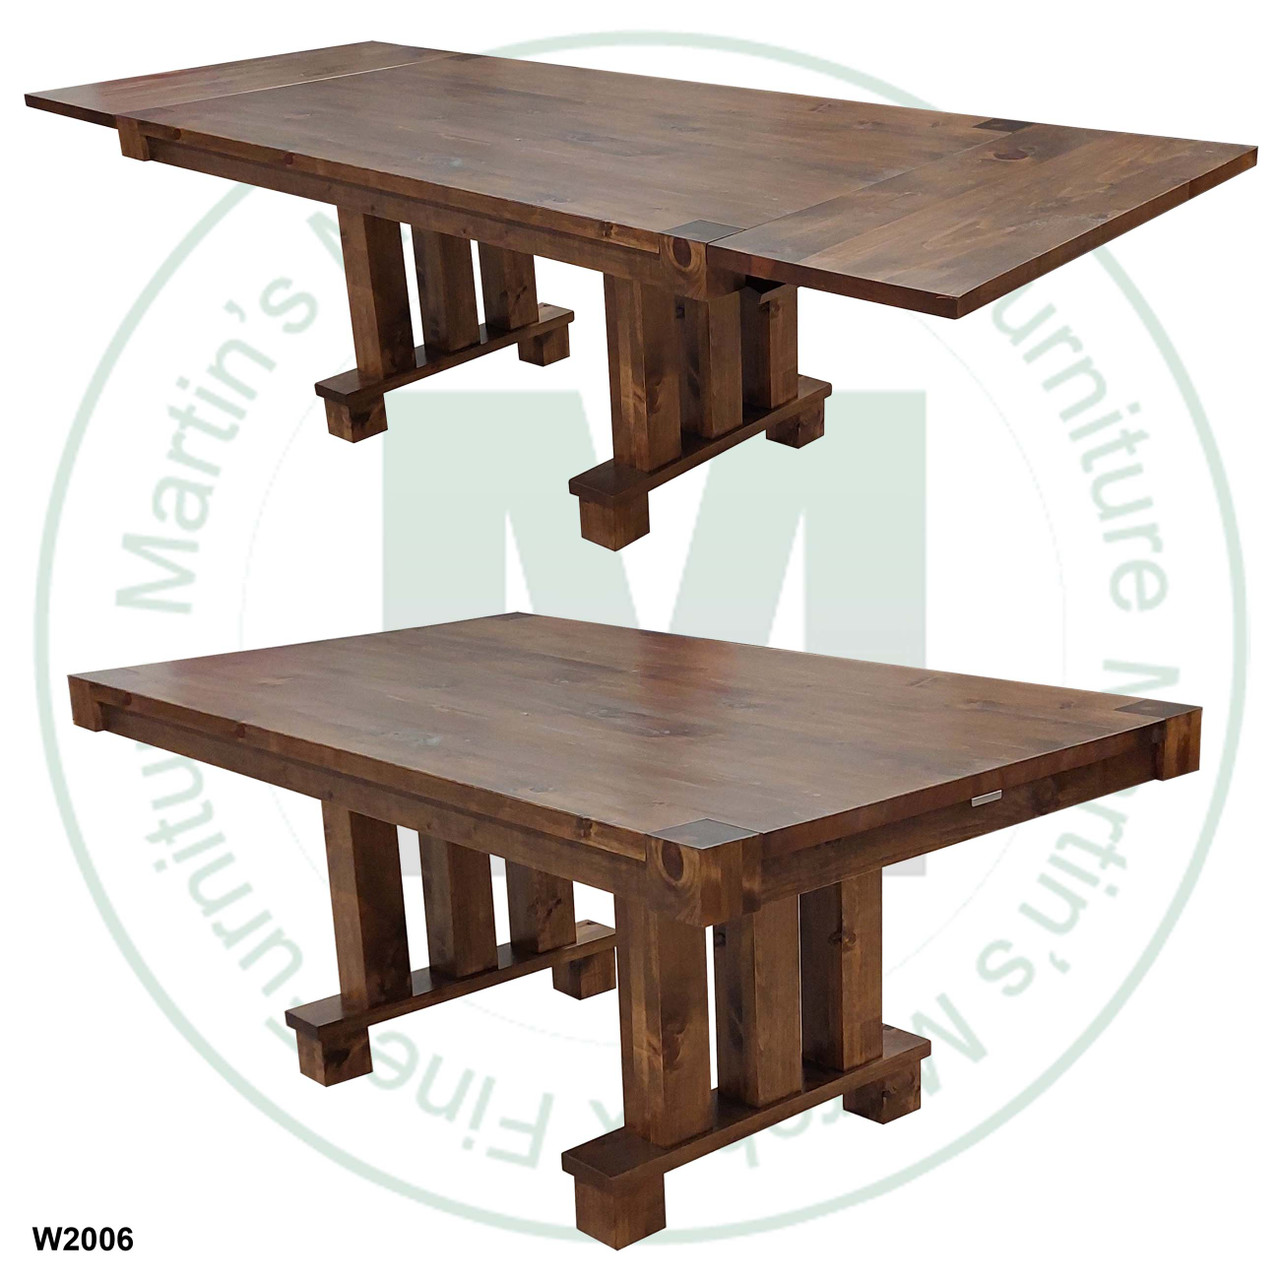 Oak Backwoods Solid Top Pedestal Table 48''D x 120''W x 30''H With 2 - 18'' Leaves